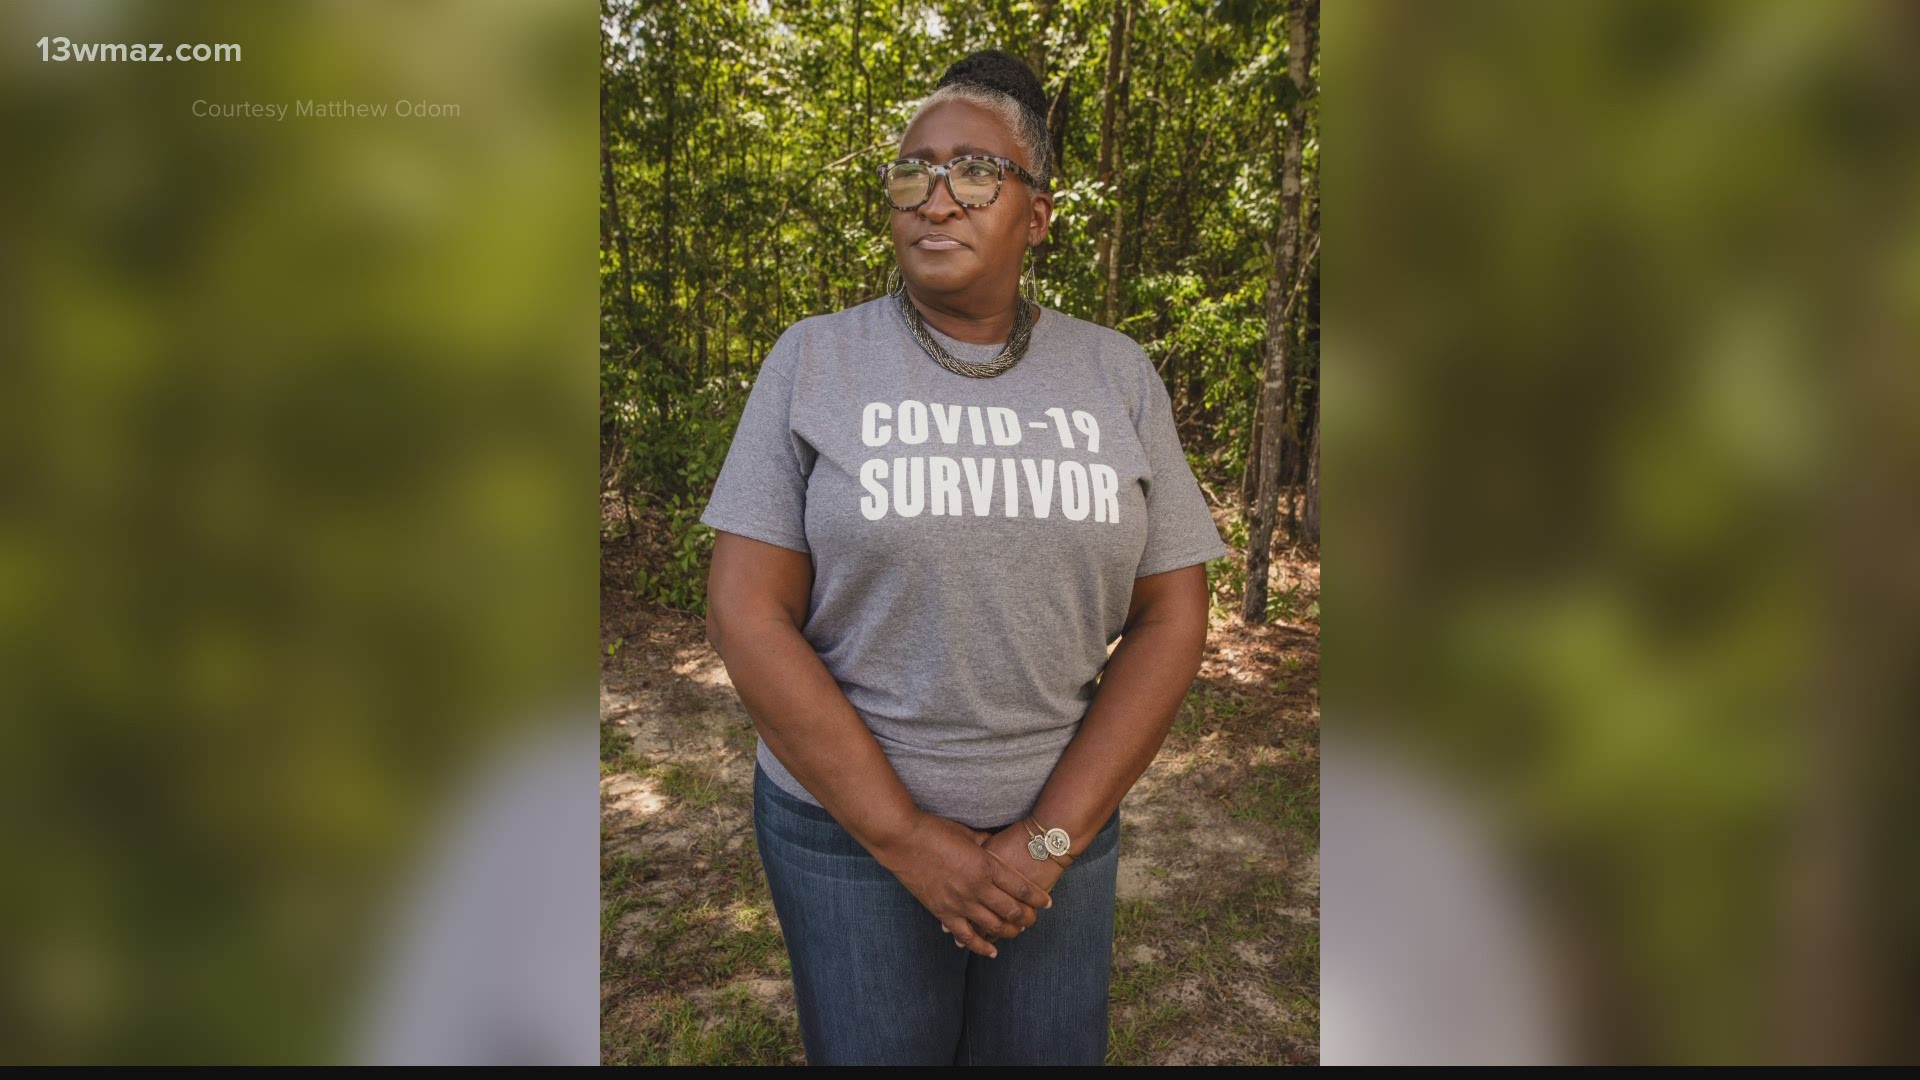 Photographer Matthew Odom is putting together a photo essay on Central Georgia's COVID-19 survivors